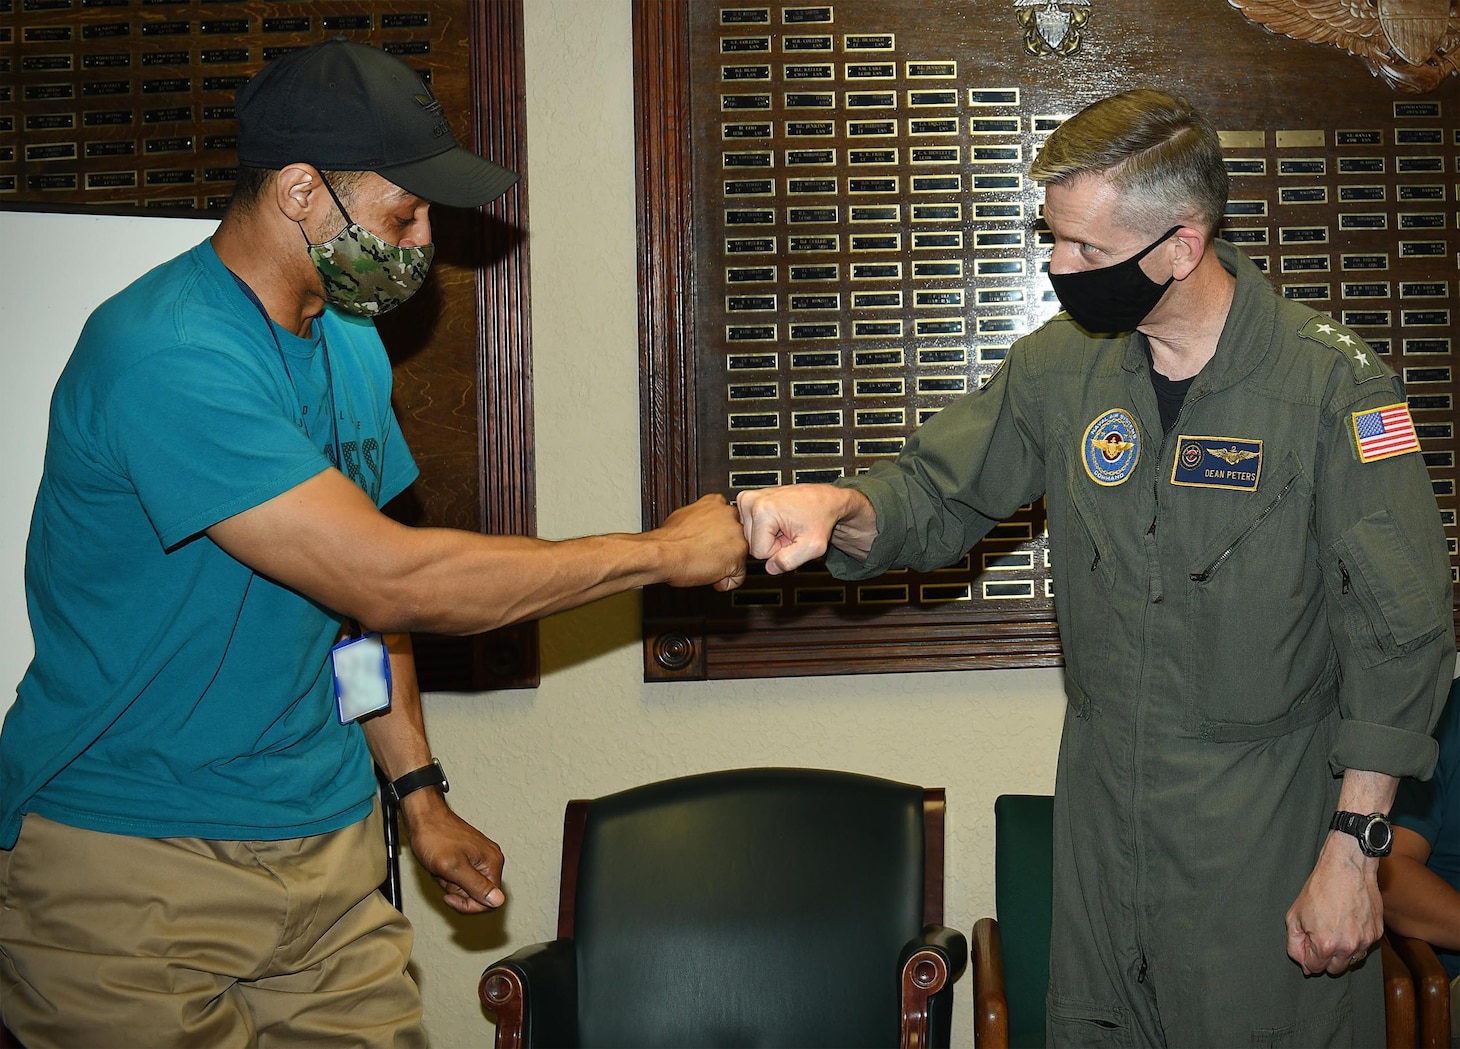 210429-N-DG679-107
MAYPORT, Fla. (April 29, 2021) Vice Adm. Dean Peters, commander, Naval Air Systems Command, fist bumps Combined Trades Leader Tomias Moore after presenting him a coin during his closing remarks following a tour of Fleet Readiness Center Southeast’s (FRCSE) Vertical Lift Production Line at Naval Station Mayport. Vice Adm. Dean Peters visited FRCSE as part of a Micro Boots on the Ground event, Apr. 29, 2021. (U.S. Navy Photo by Toiete Jackson/Released)